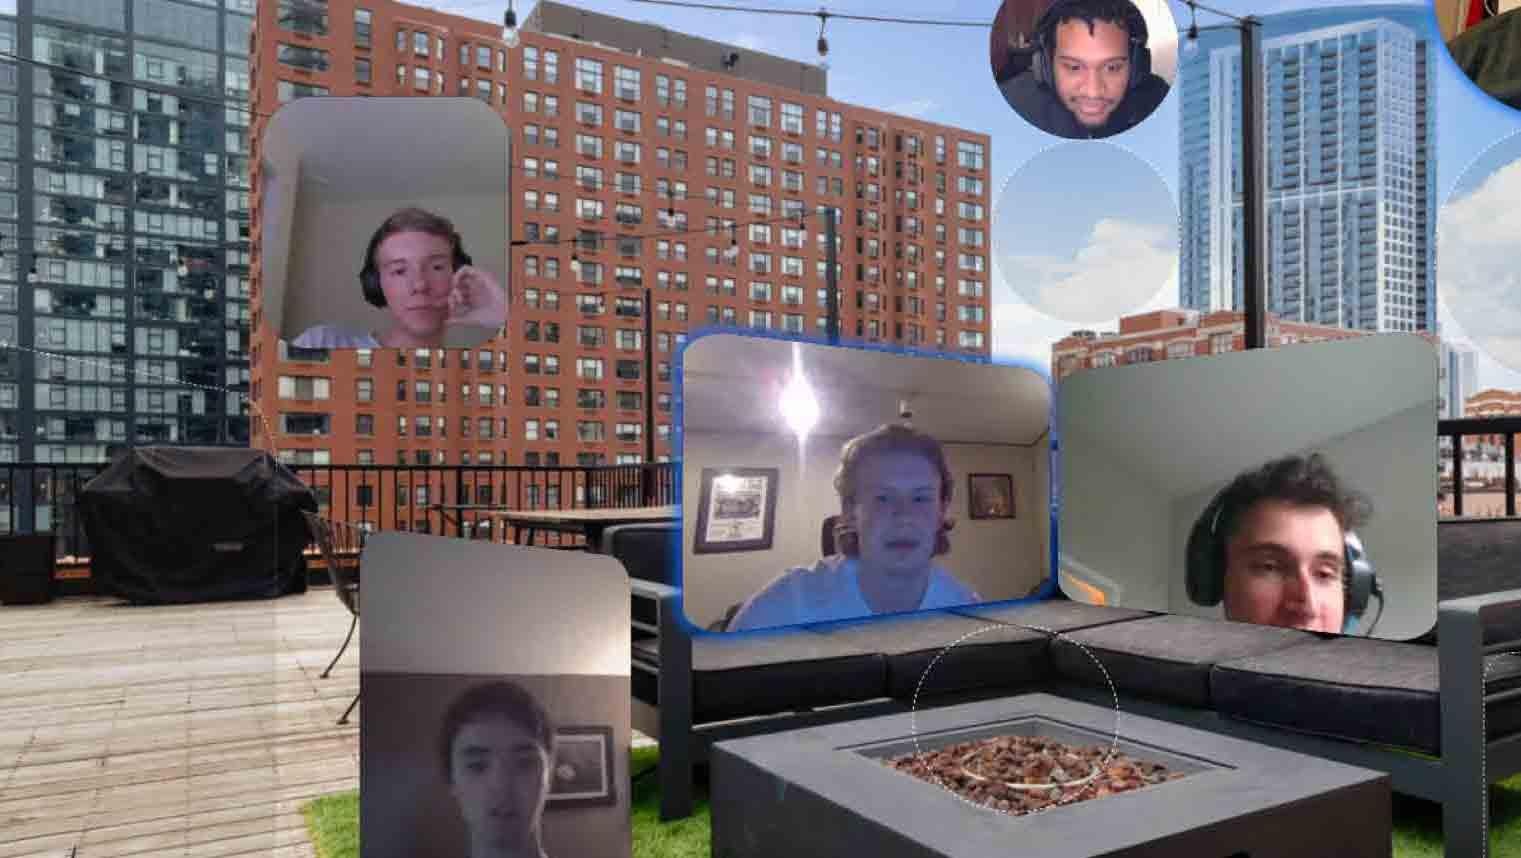 STS students seated on a virtual deck via the Nooks platform